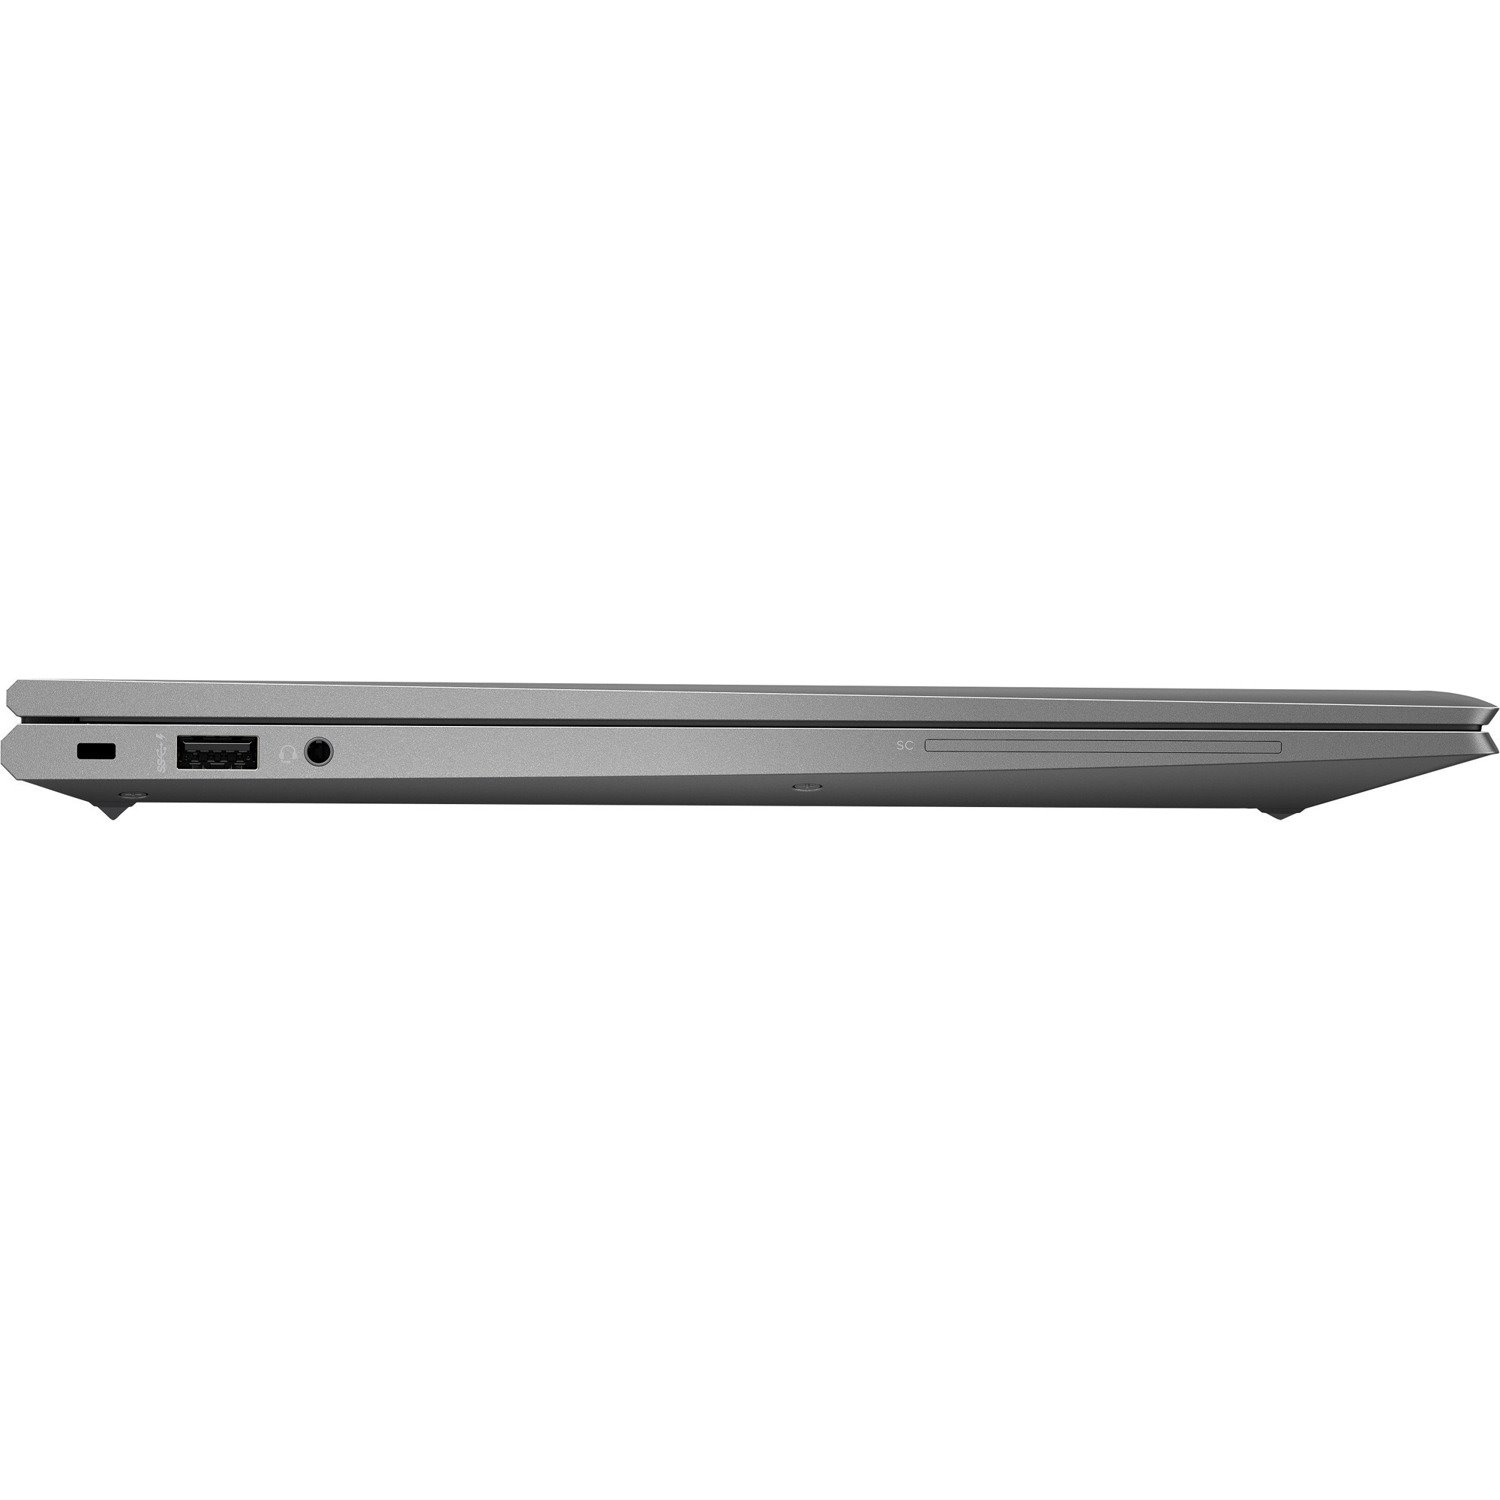 HP ZBook Firefly G8 14" Mobile Workstation - Full HD - 1920 x 1080 - Intel Core i7 11th Gen i7-1165G7 Quad-core (4 Core) 2.80 GHz - 16 GB Total RAM - 512 GB SSD